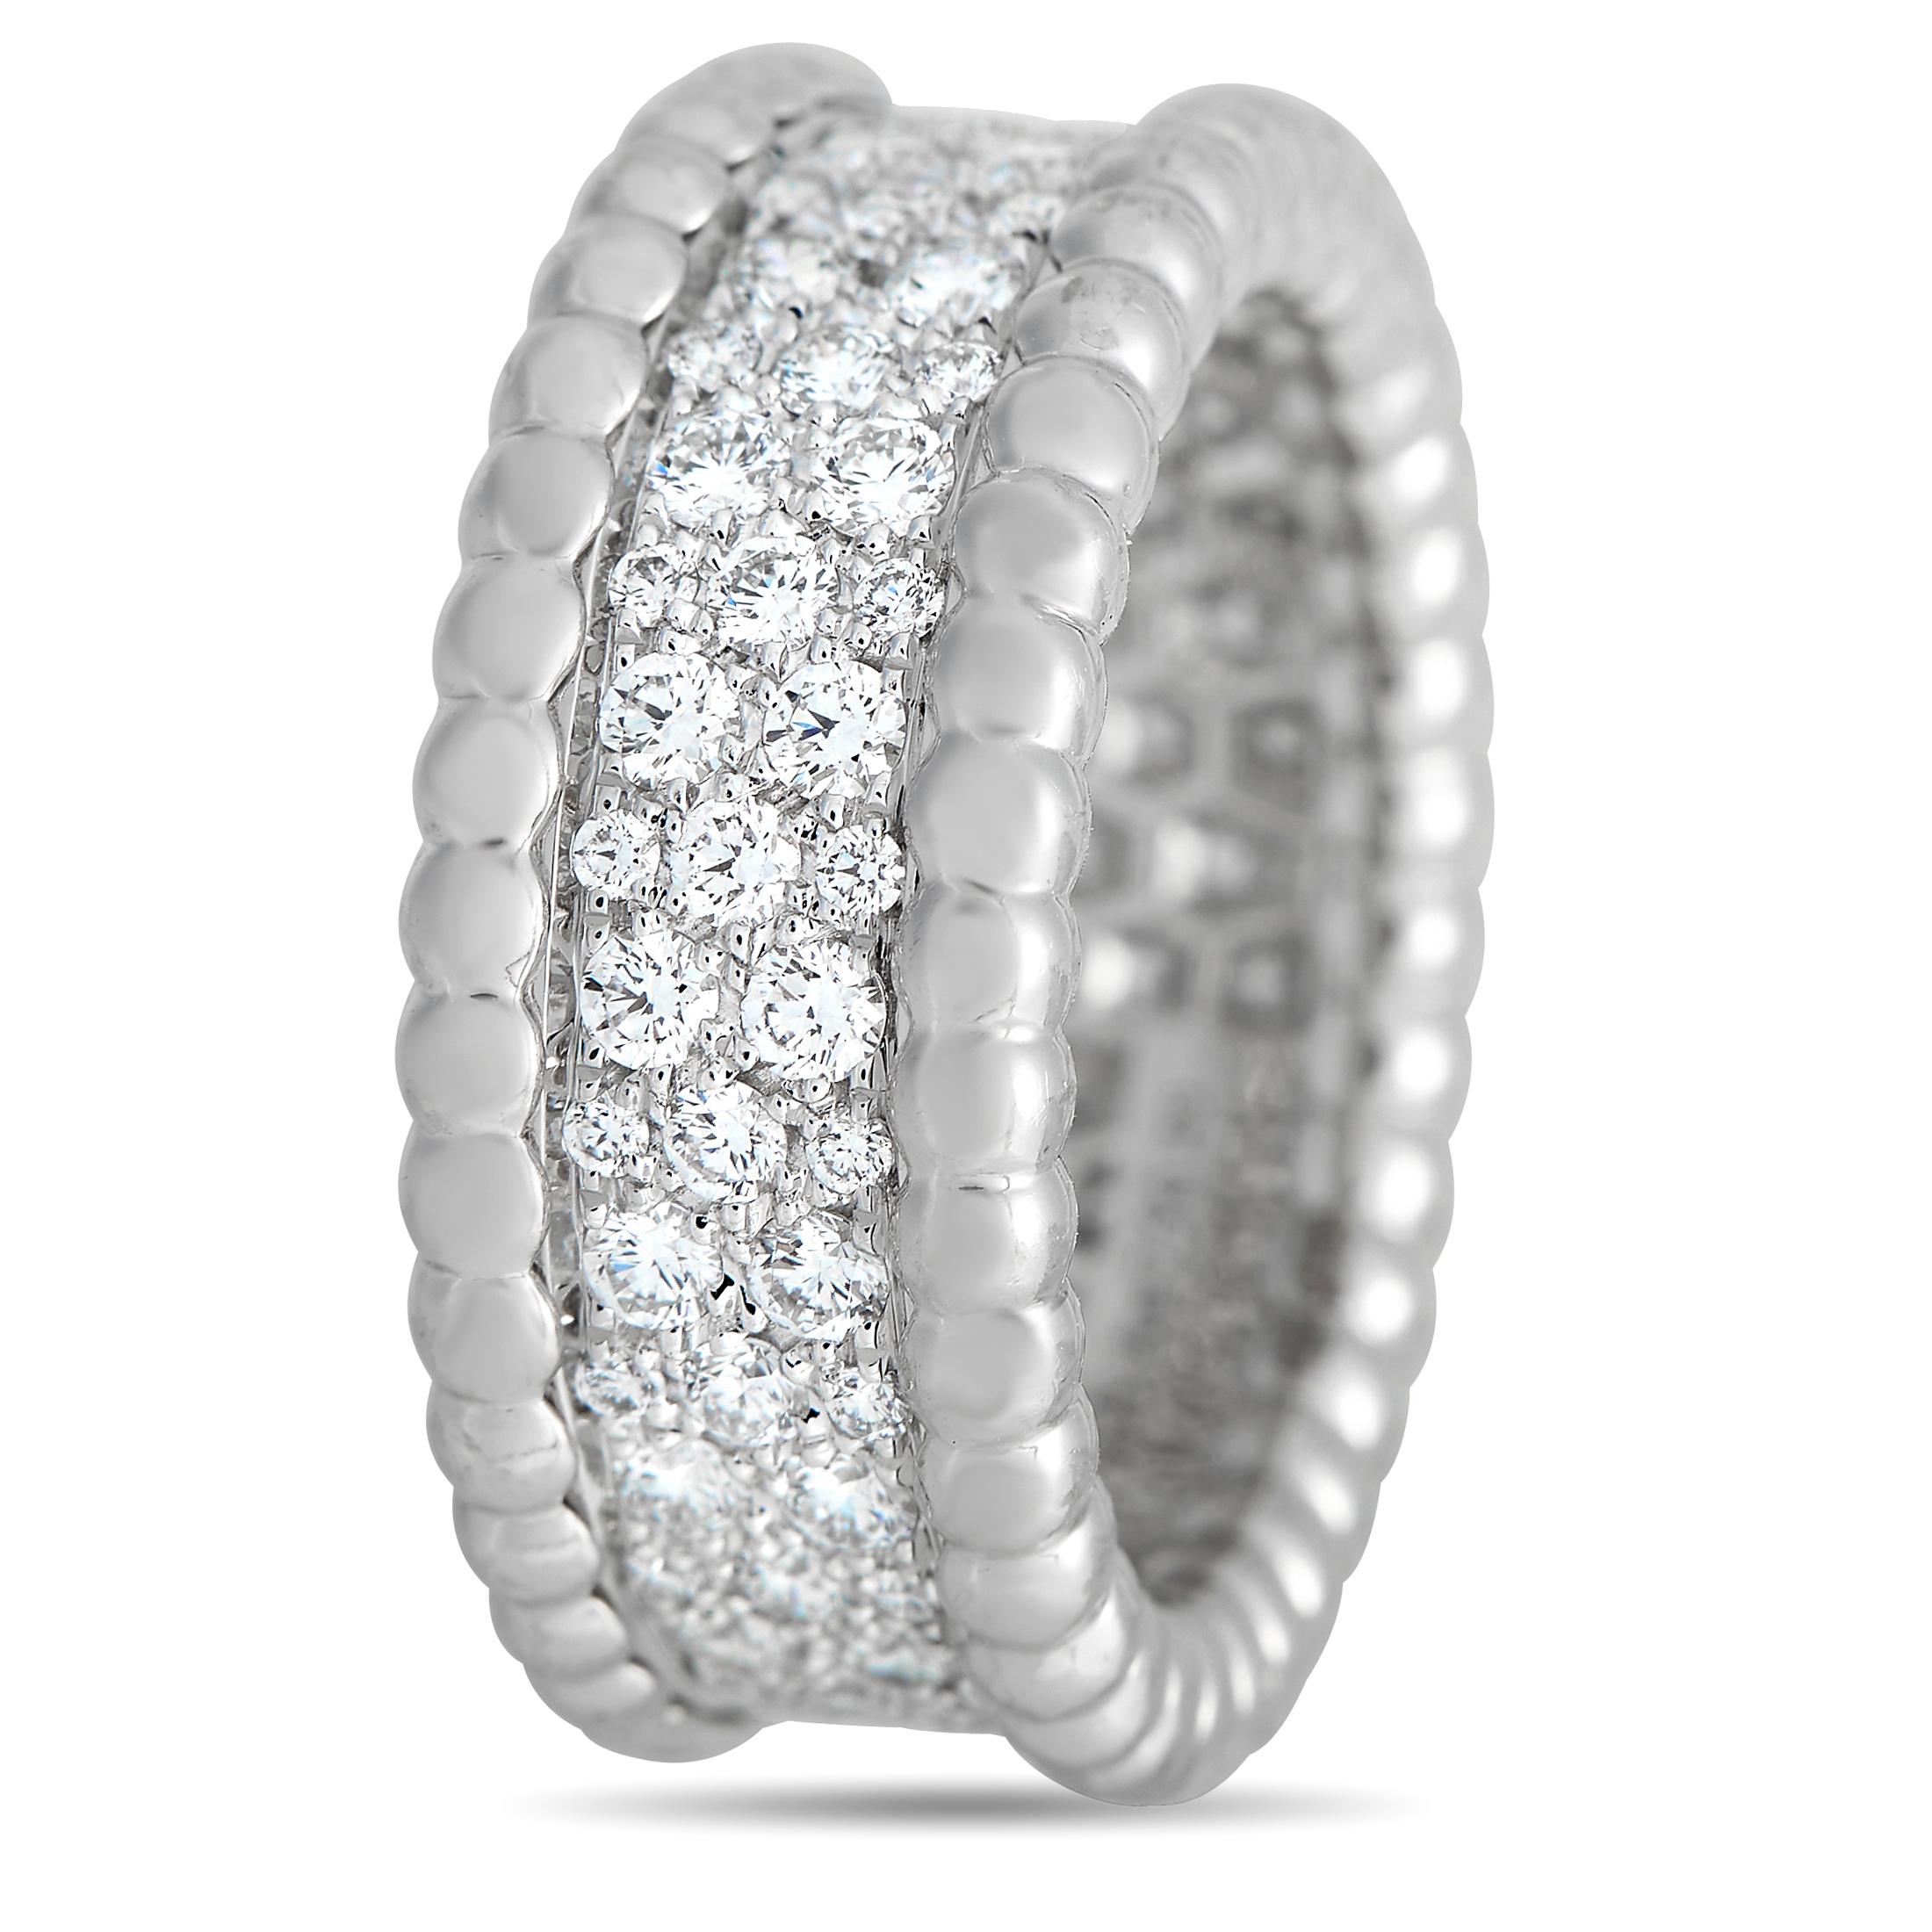 The Van Cleef & Arpels Perle ring looks bold and delicate at once. It features a 6mm-thick white gold band lined with three rows of diamonds. The shank's edges are traced with a dainty row of tiny, polished white gold beads.Offered in estate